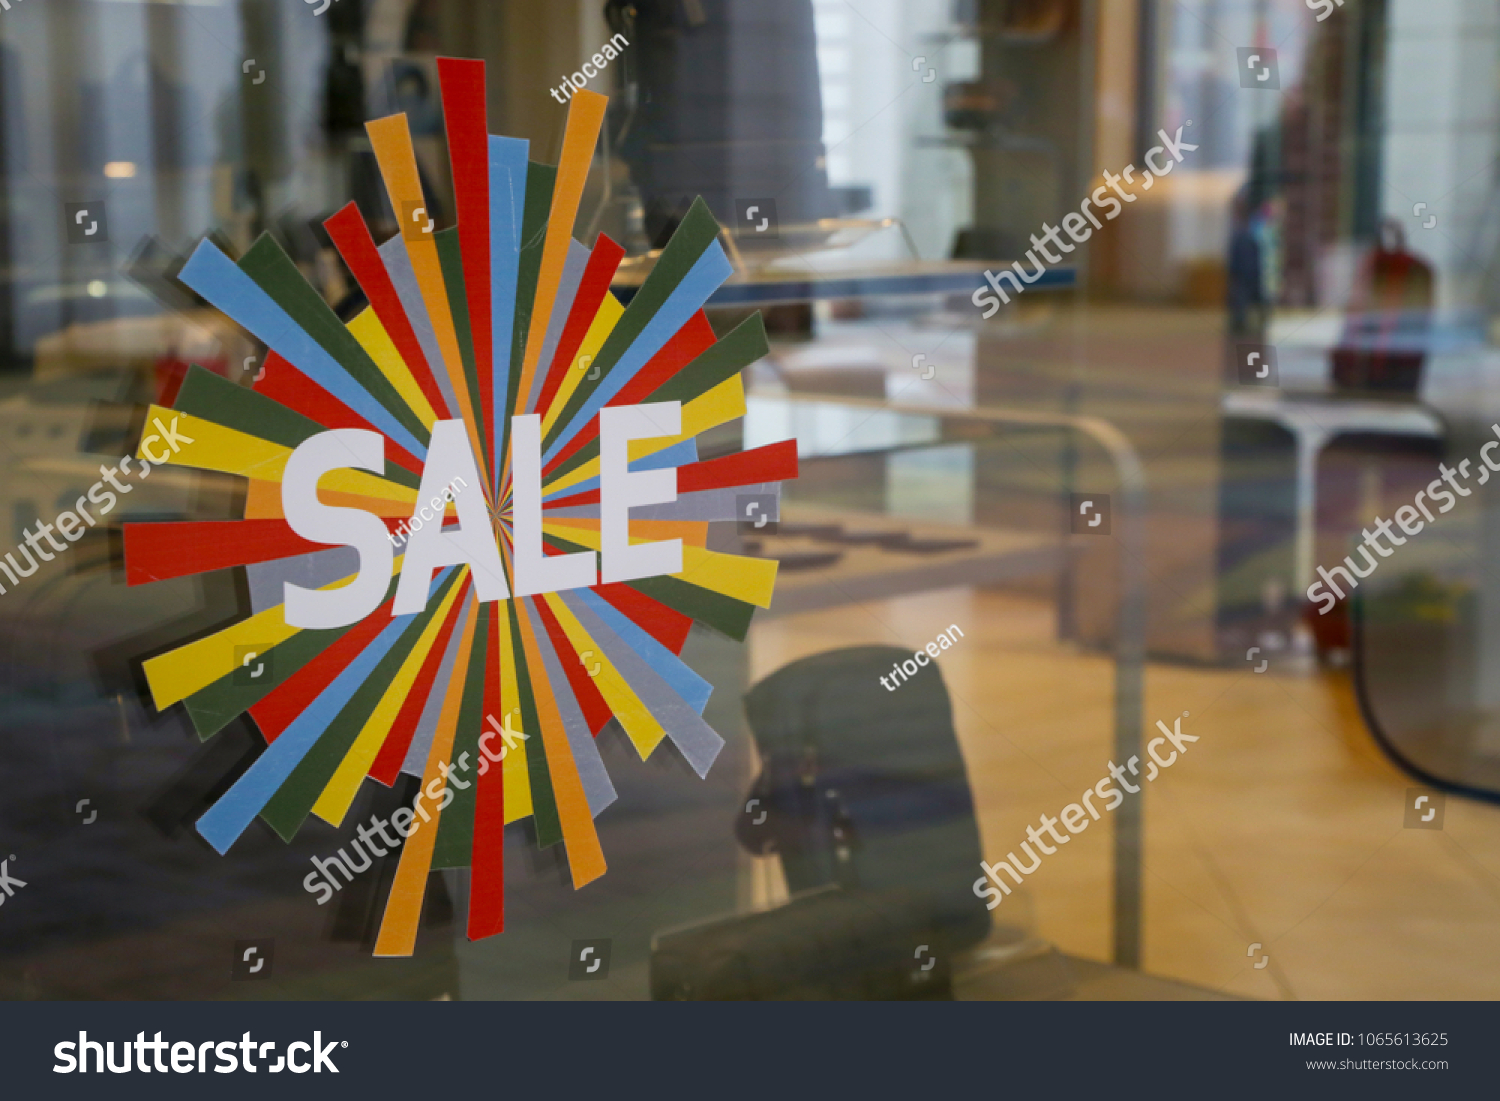 Sale signs - shopping concept #1065613625